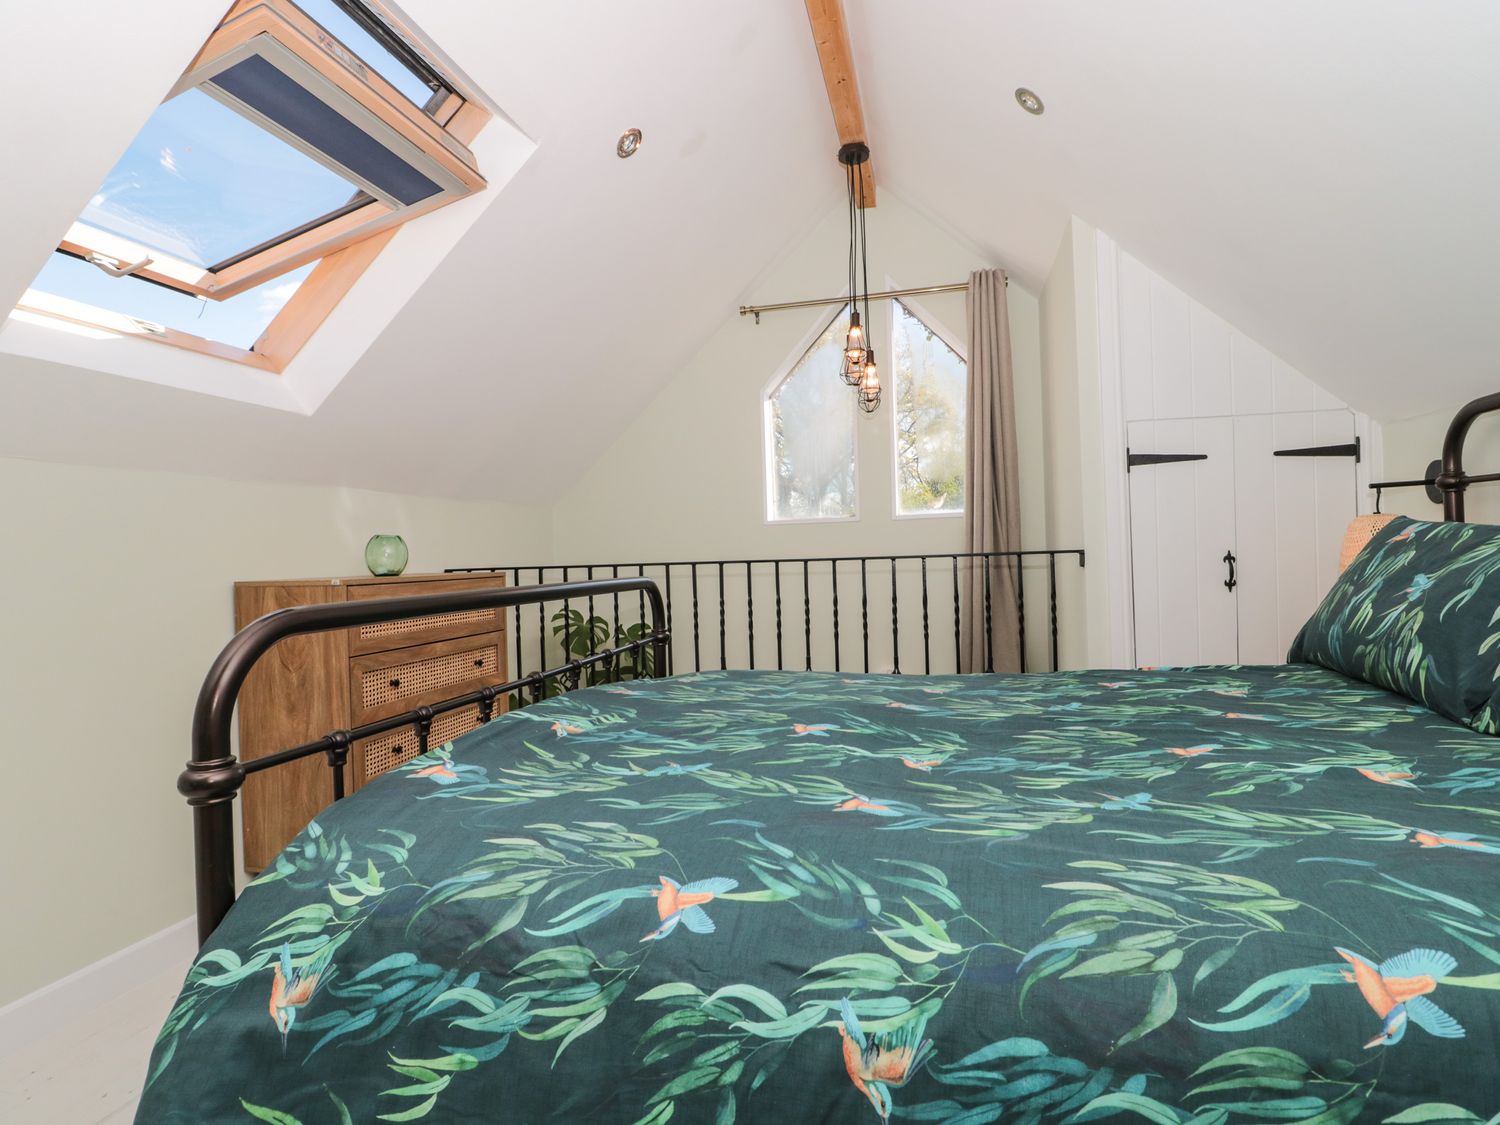 The Orch is located in, Blakeney, Gloucestershire. Hot tub. Pet-friendly. Close to amenities. Garden